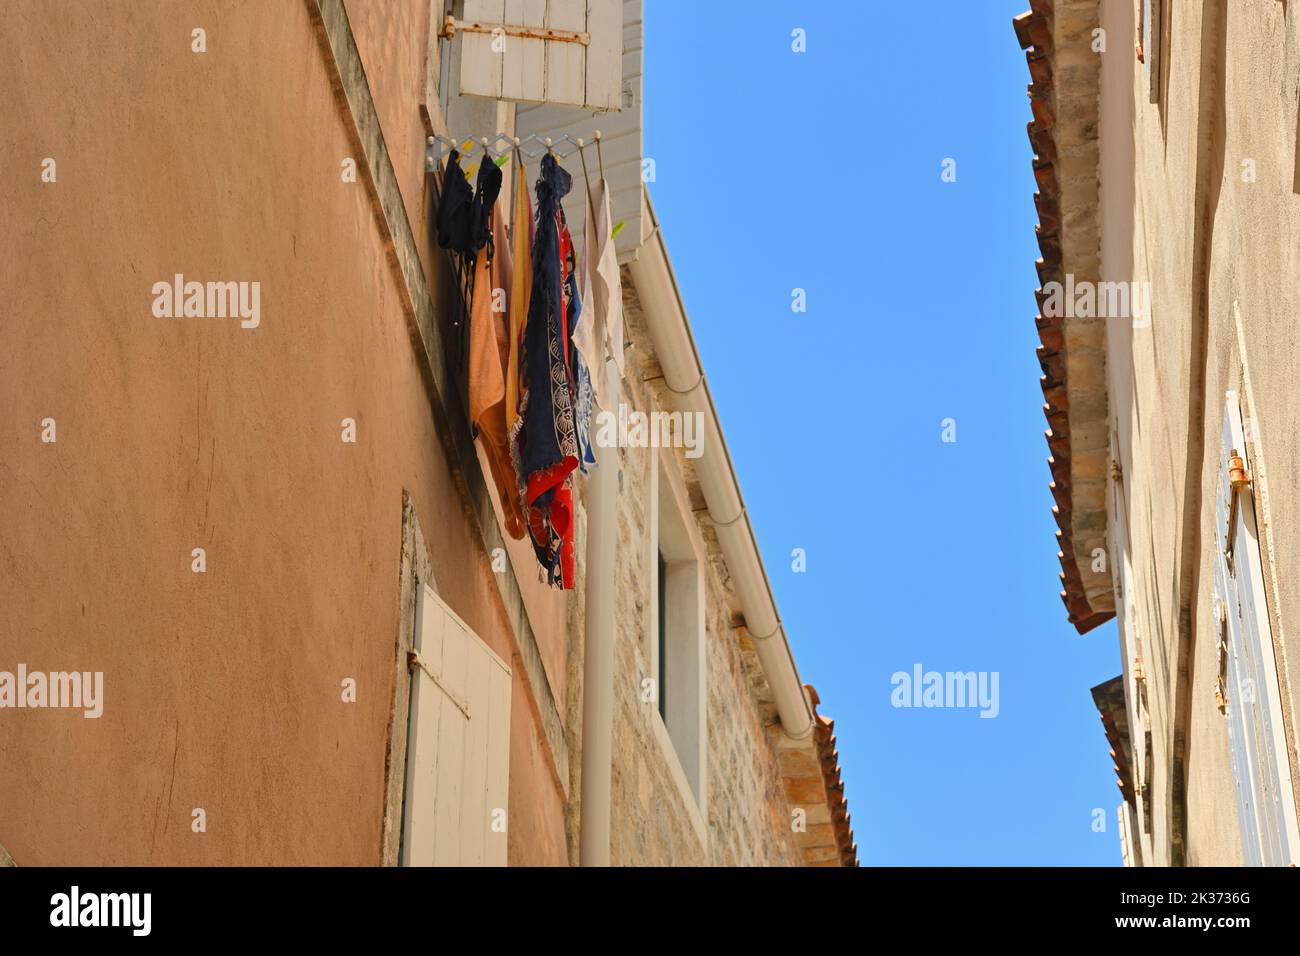 Drying clothes. Architecture of the Old Town in Budva. Montenegro Stock Photo